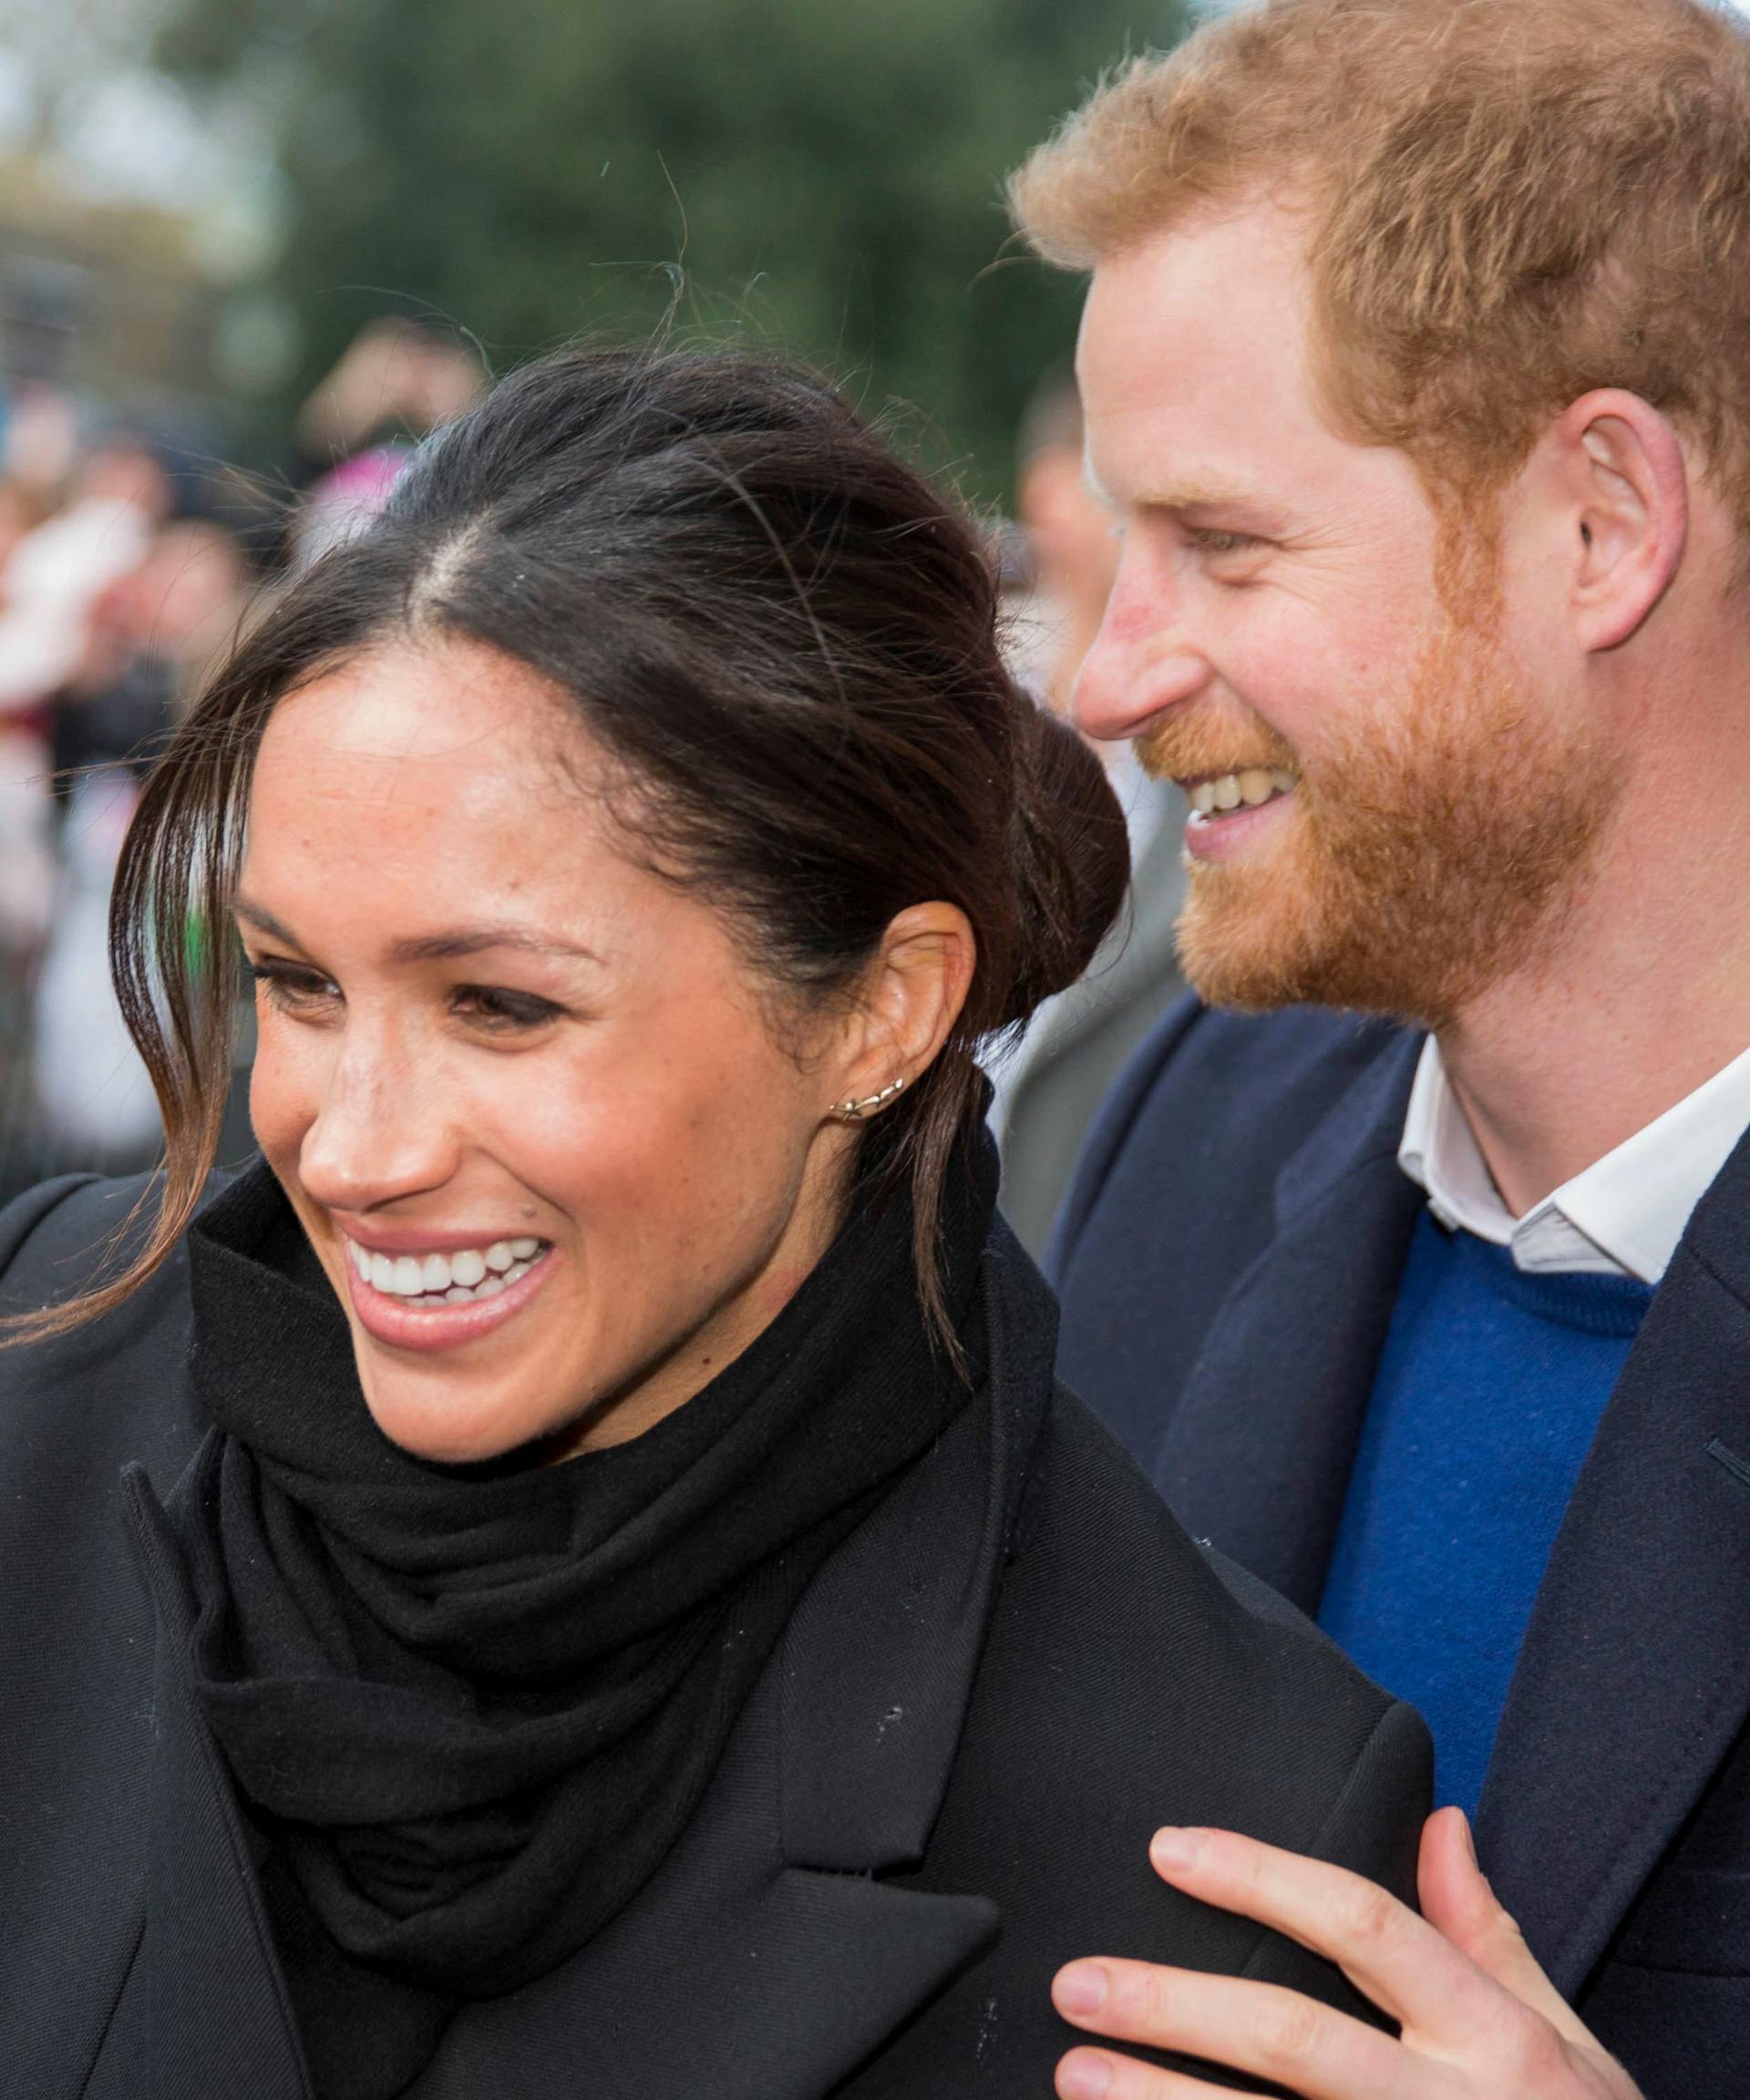 Prince Harry And Meghan Markle Receive Award For Only Having Two Kids